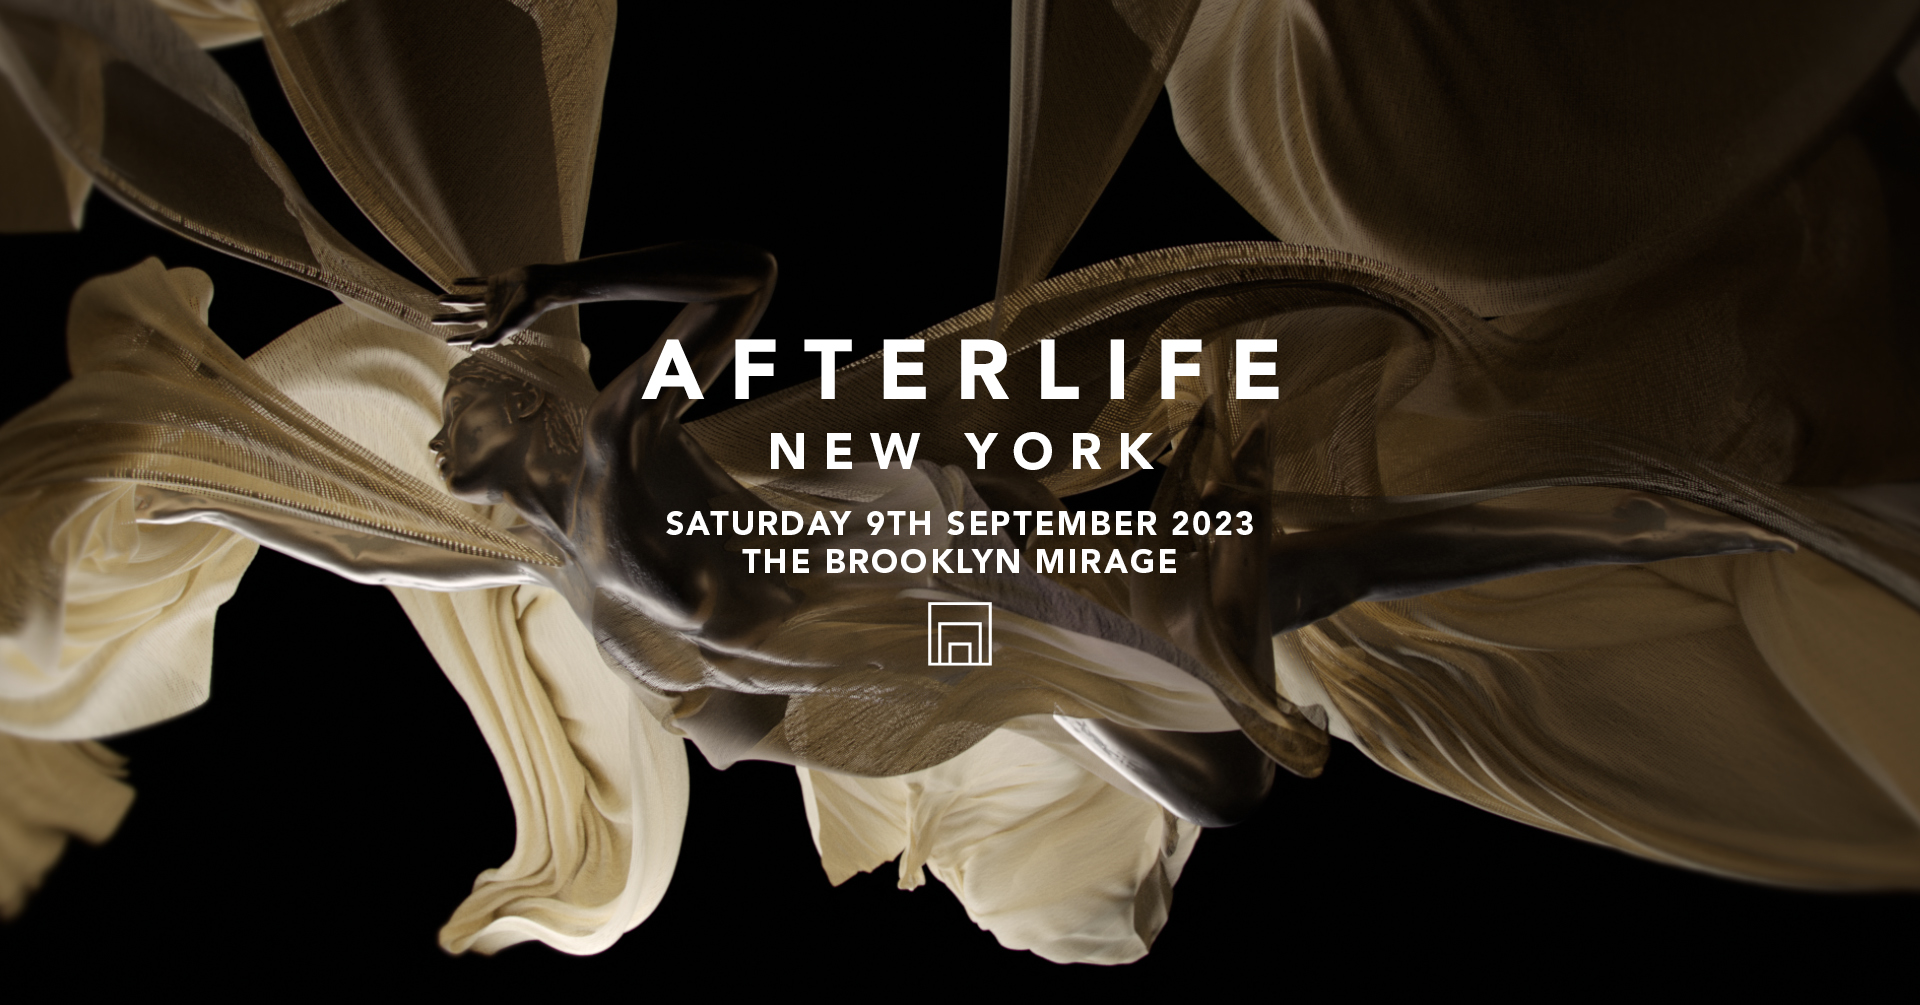 Afterlife returns to OFFWEEK Festival 2023 - Techno & House Music